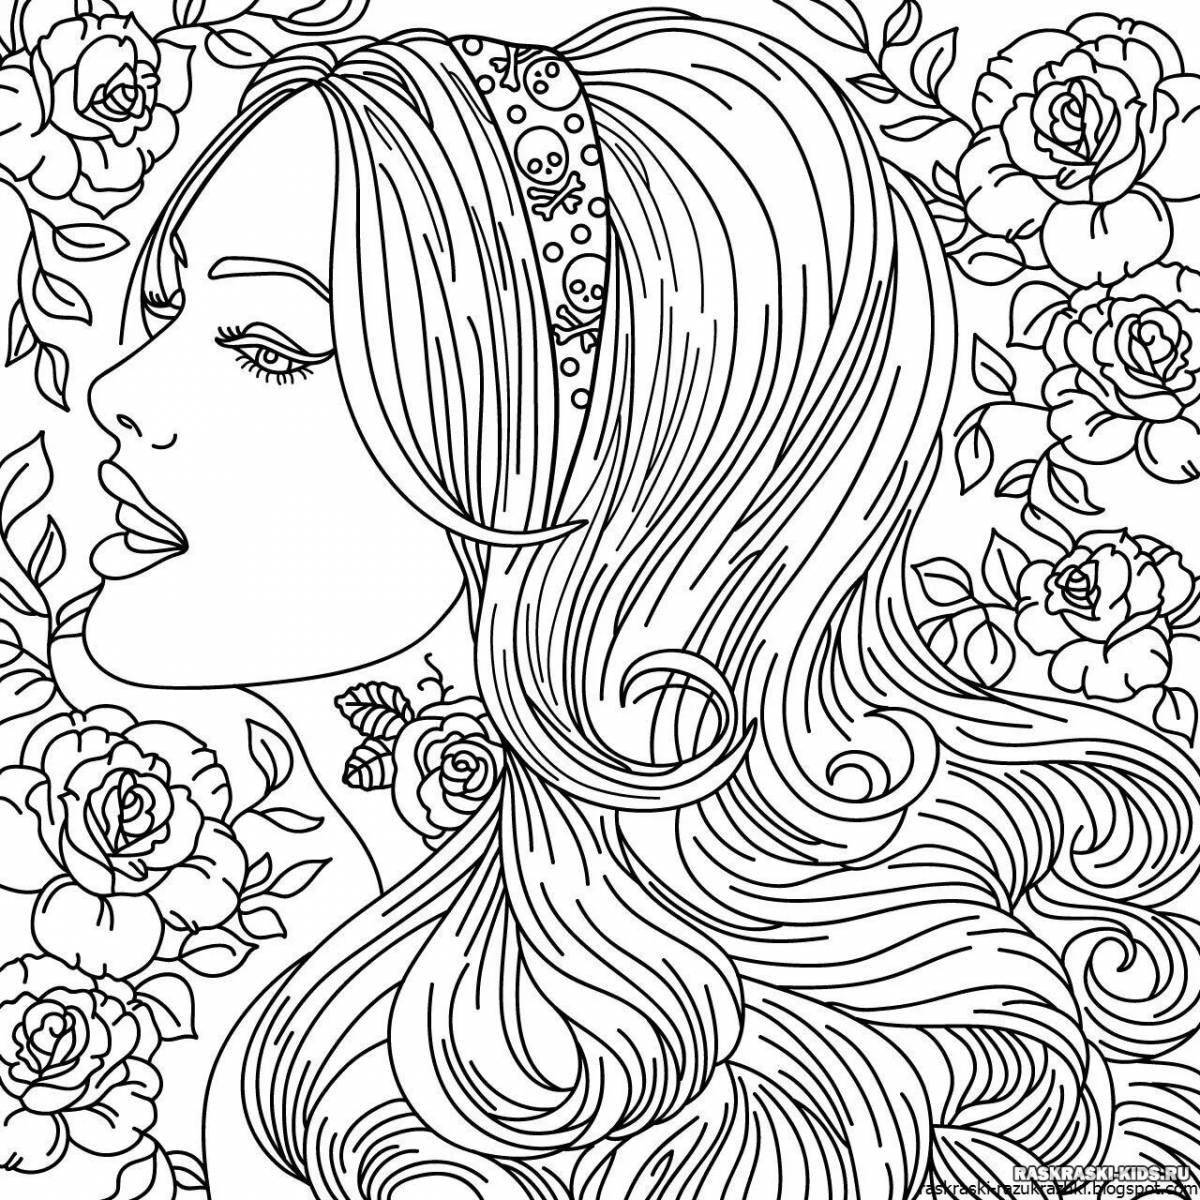 Gorgeous beauty coloring page